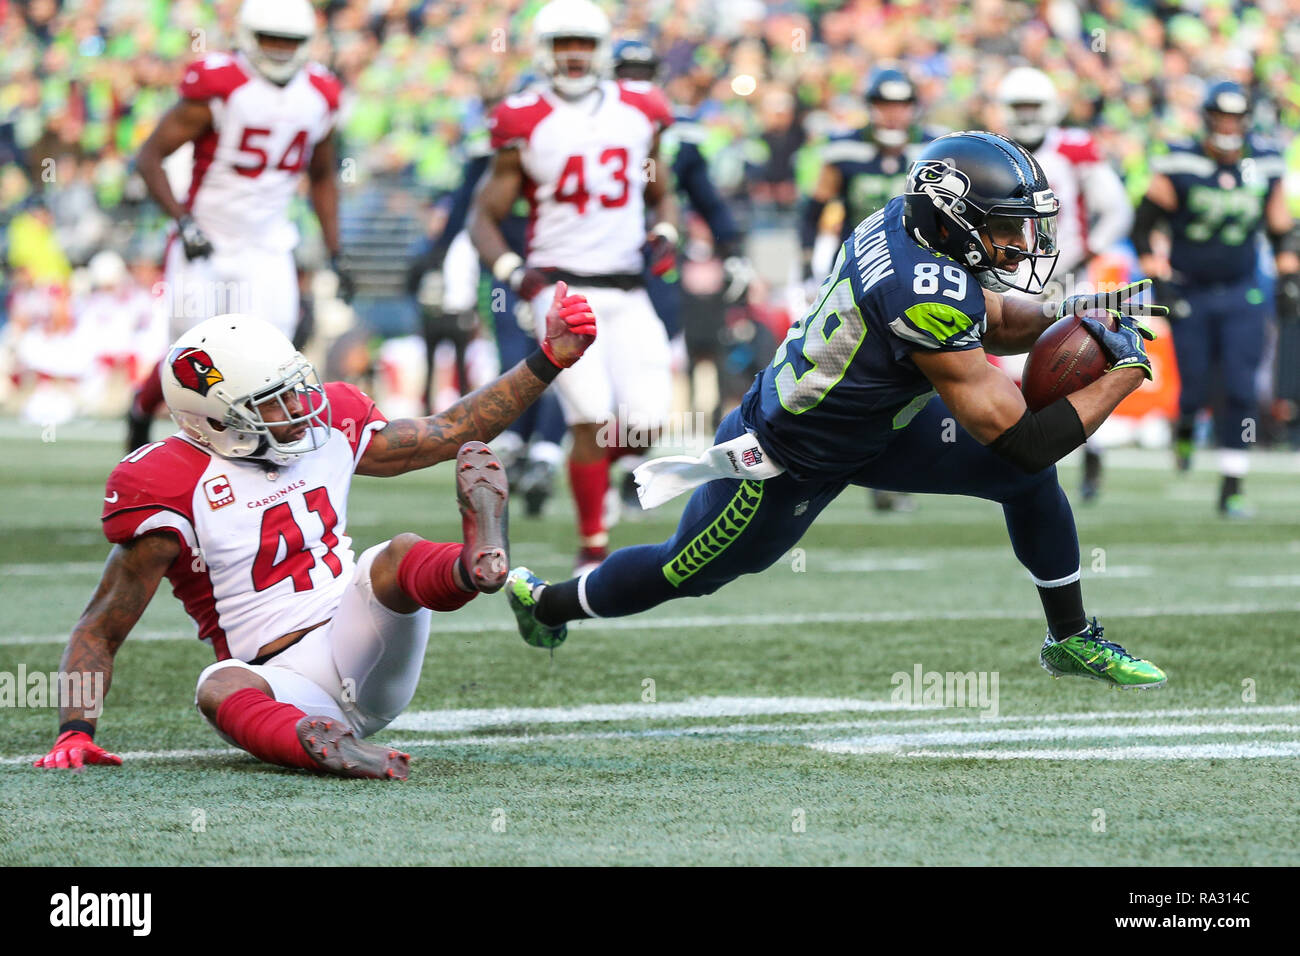 Seattle, WA, USA. 30th Dec, 2018. Arizona Cardinals safety Antoine Bethea (41) tackles Seattle Seahawks wide receiver Doug Baldwin (89) during a game between the Arizona Cardinals and the Seattle Seahawks at CenturyLink Field in Seattle, WA. The Seahawks defeated the Cardinals 27-24. Sean Brown/CSM/Alamy Live News Stock Photo